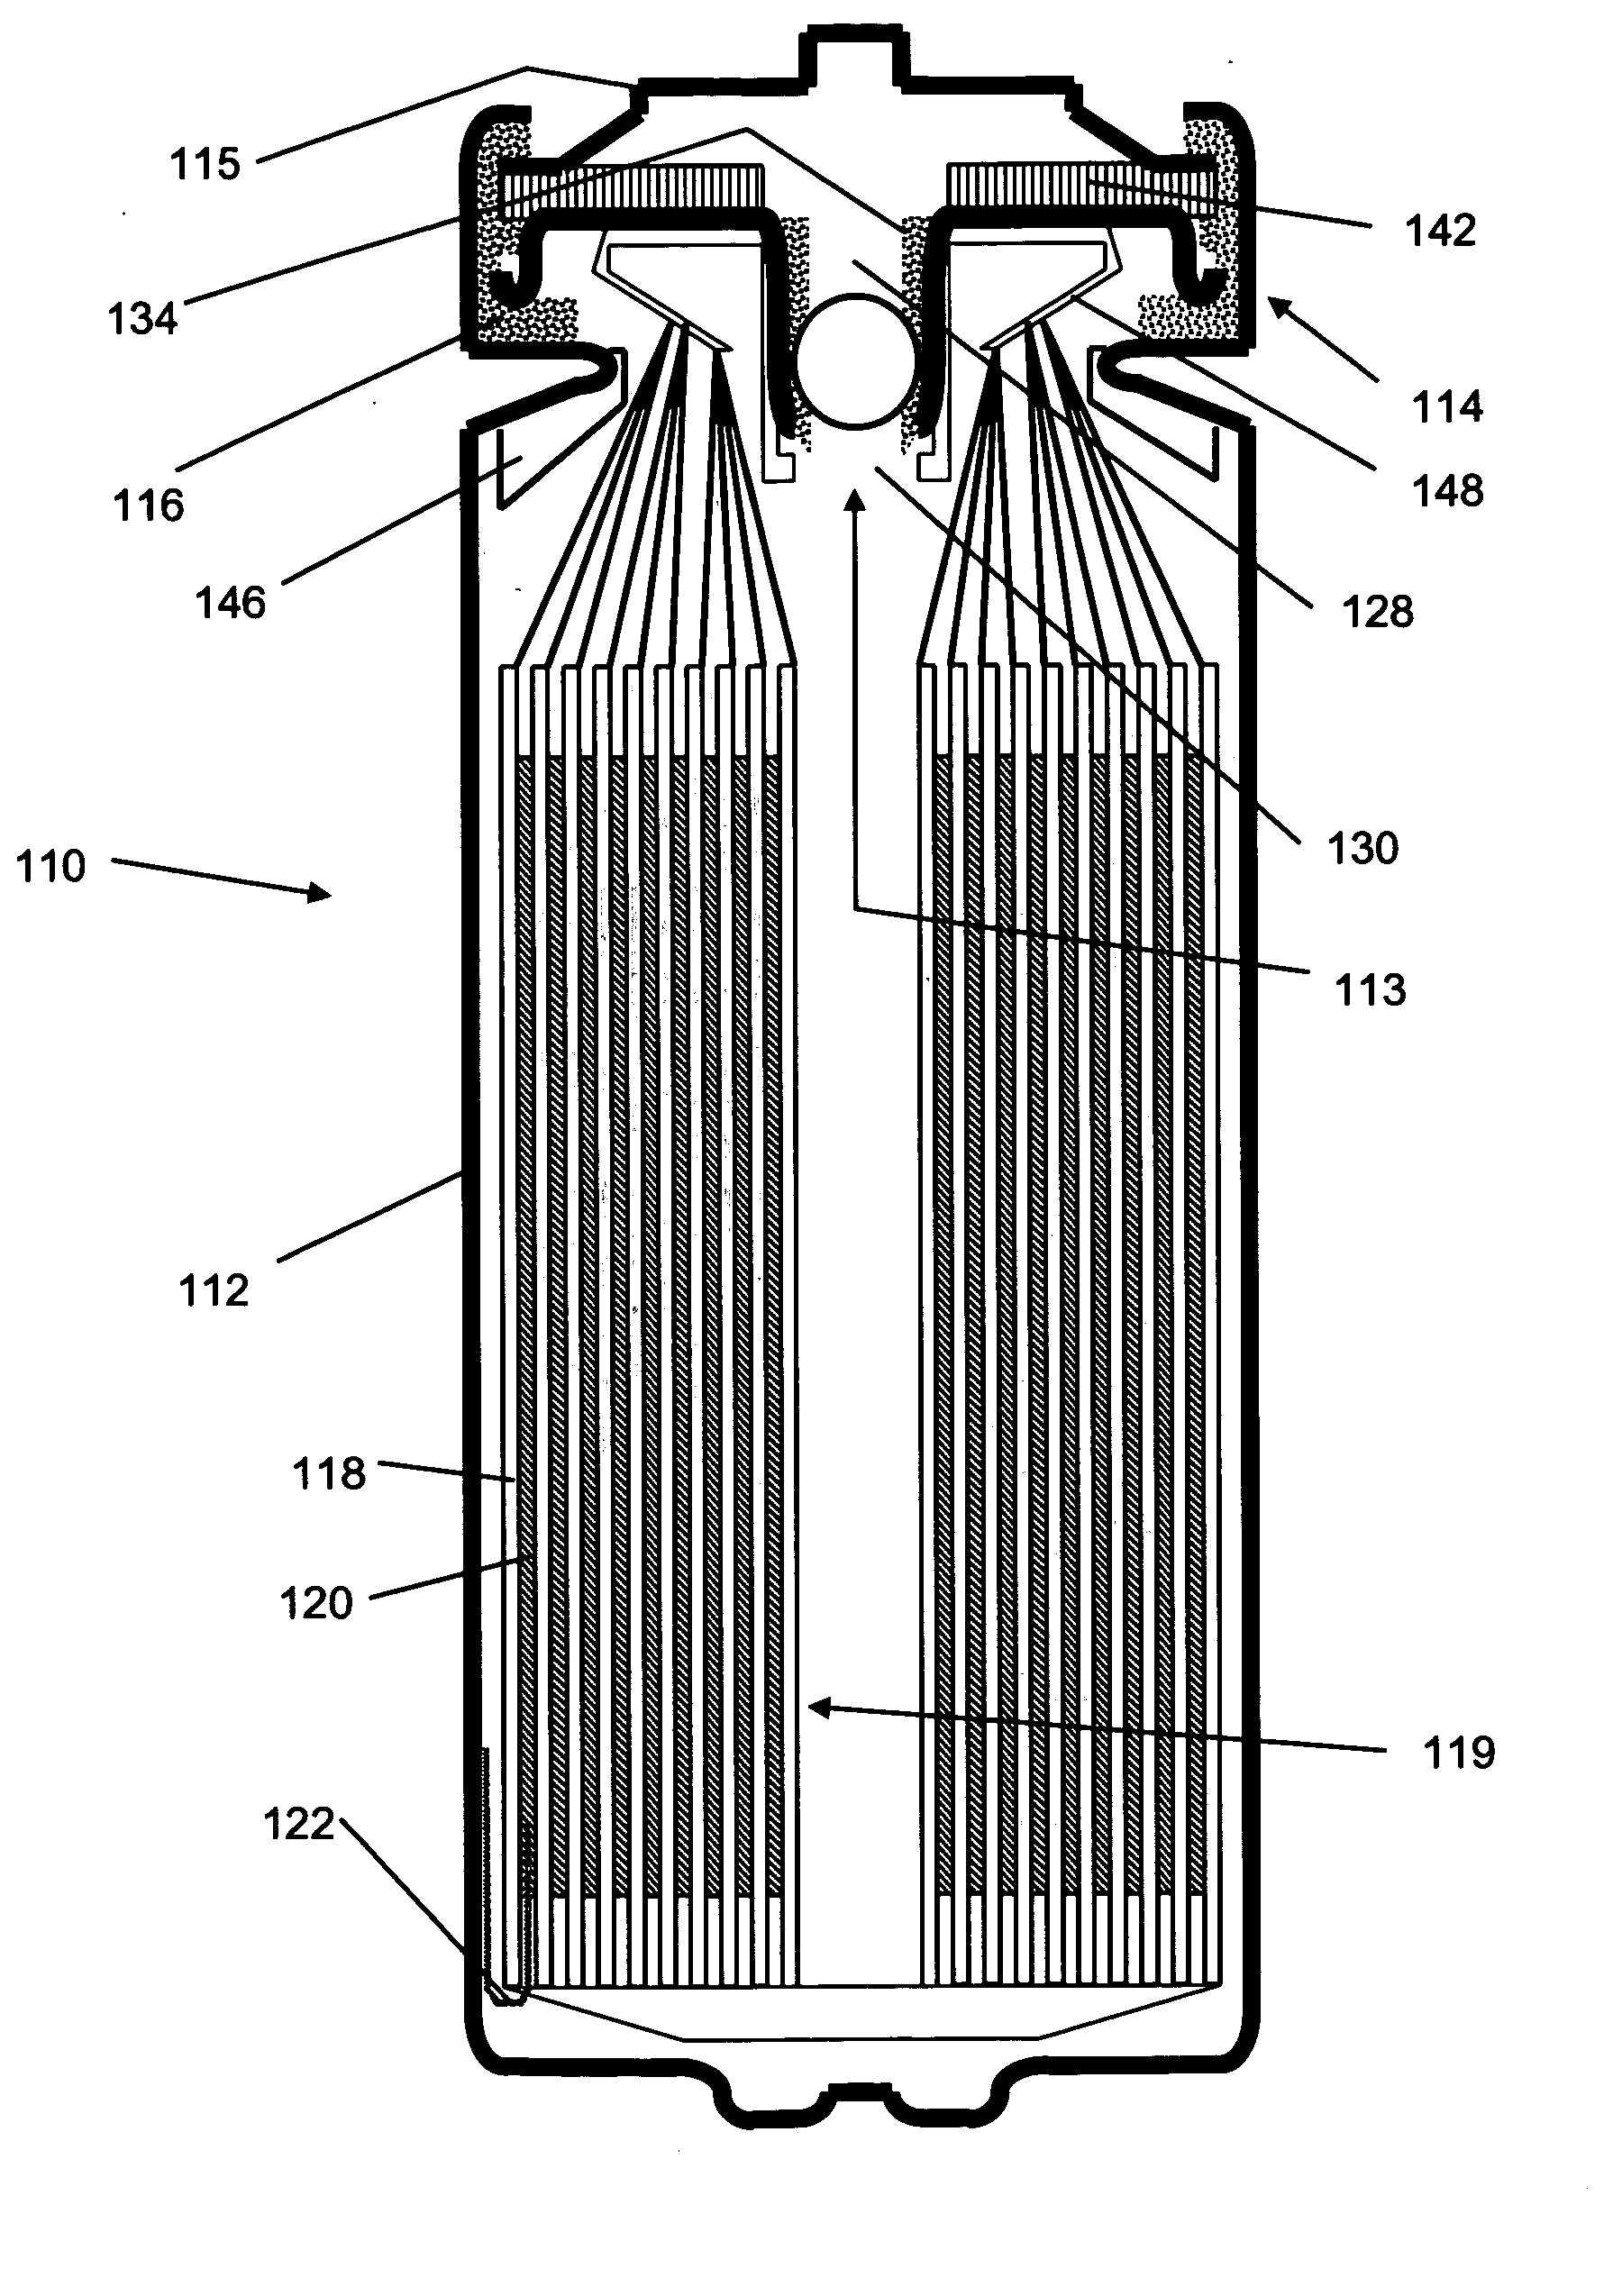 Lithium-iron disulfide cylindrical cell with modified positive electrode